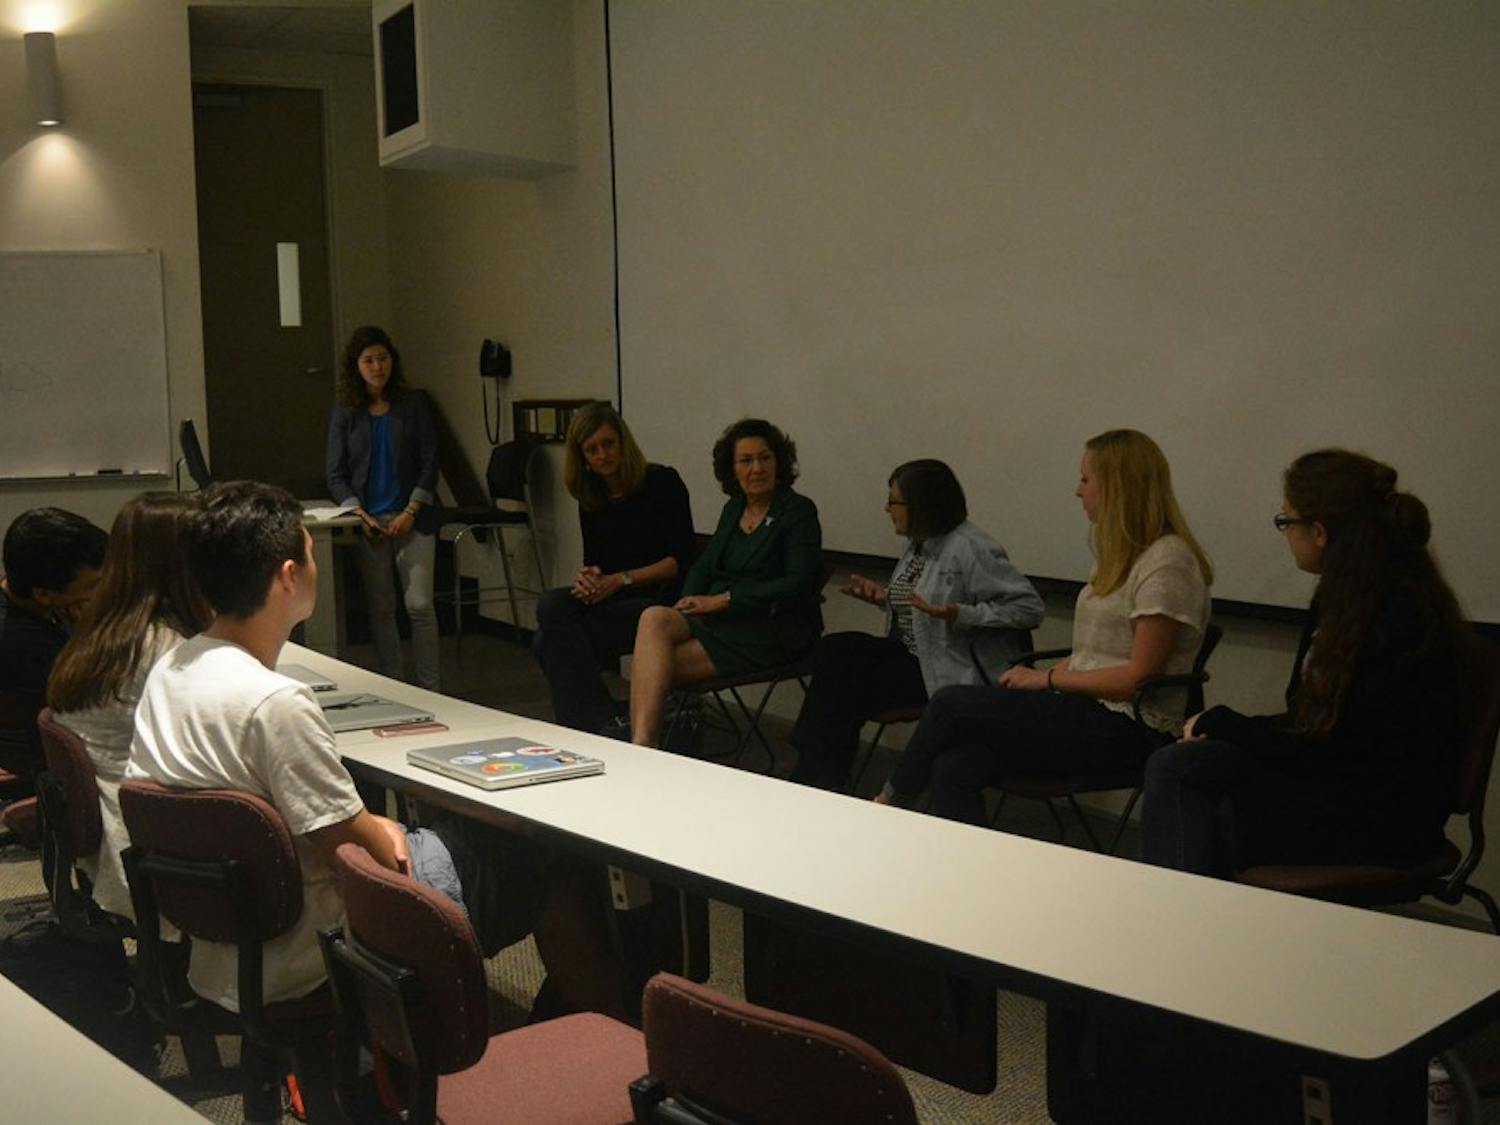 The Department of Computer Science holds a Women in Tech Discussion Panel as part of the Women in Tech Week on Wednesday night 